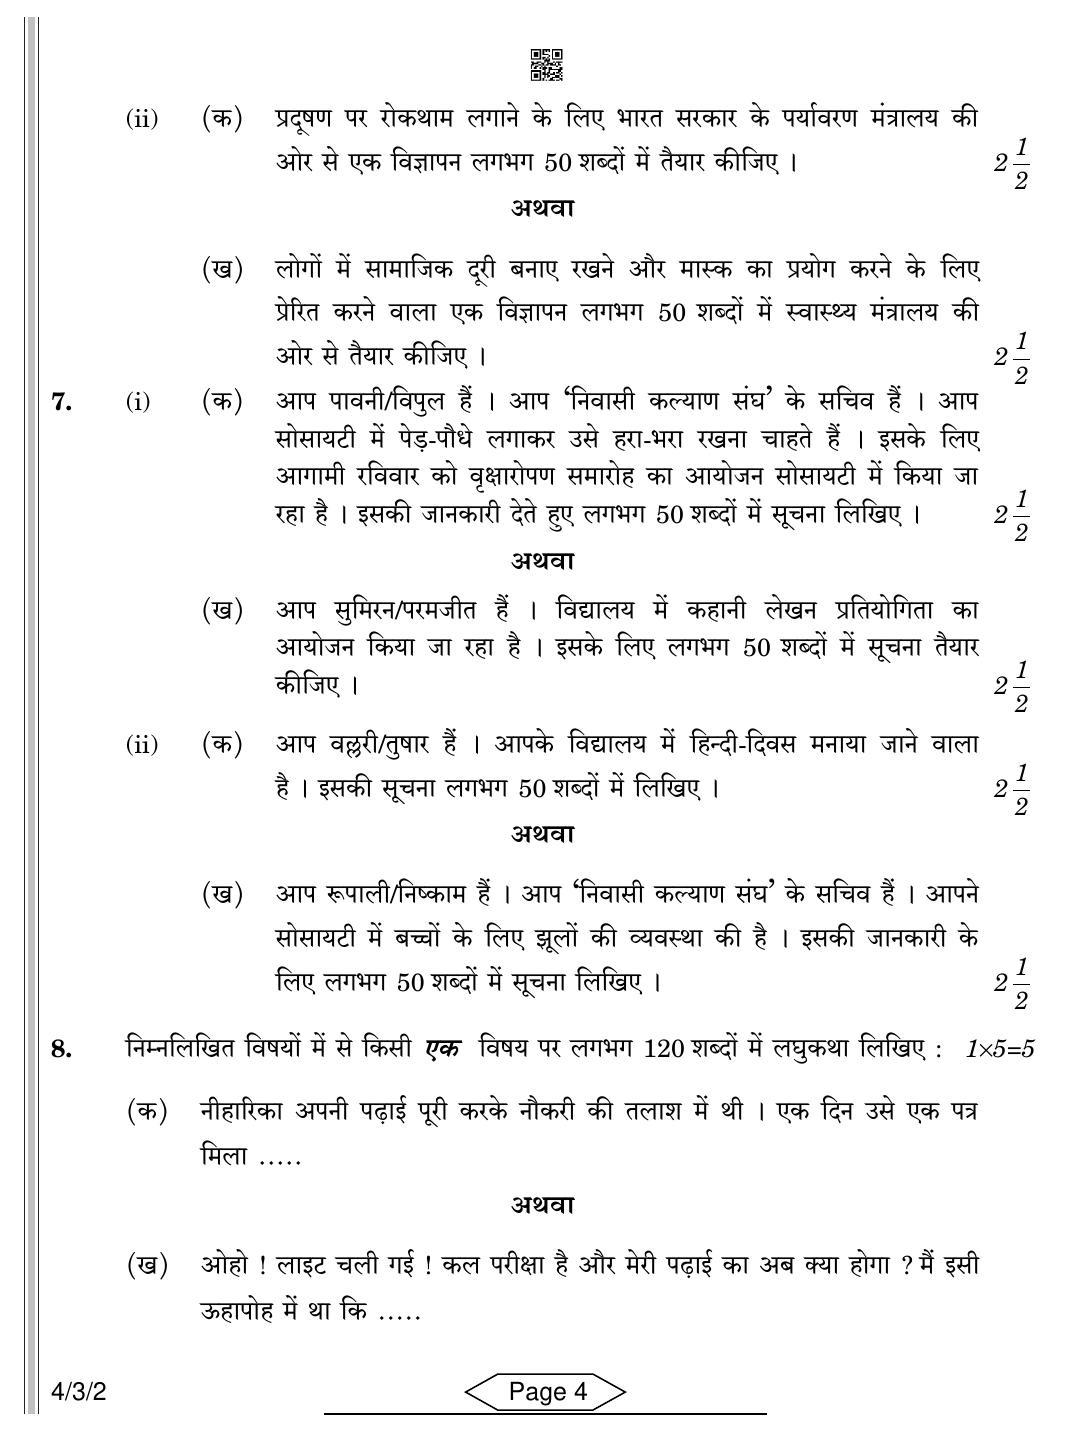 CBSE Class 10 4-3-2 Hindi B 2022 Question Paper - Page 4